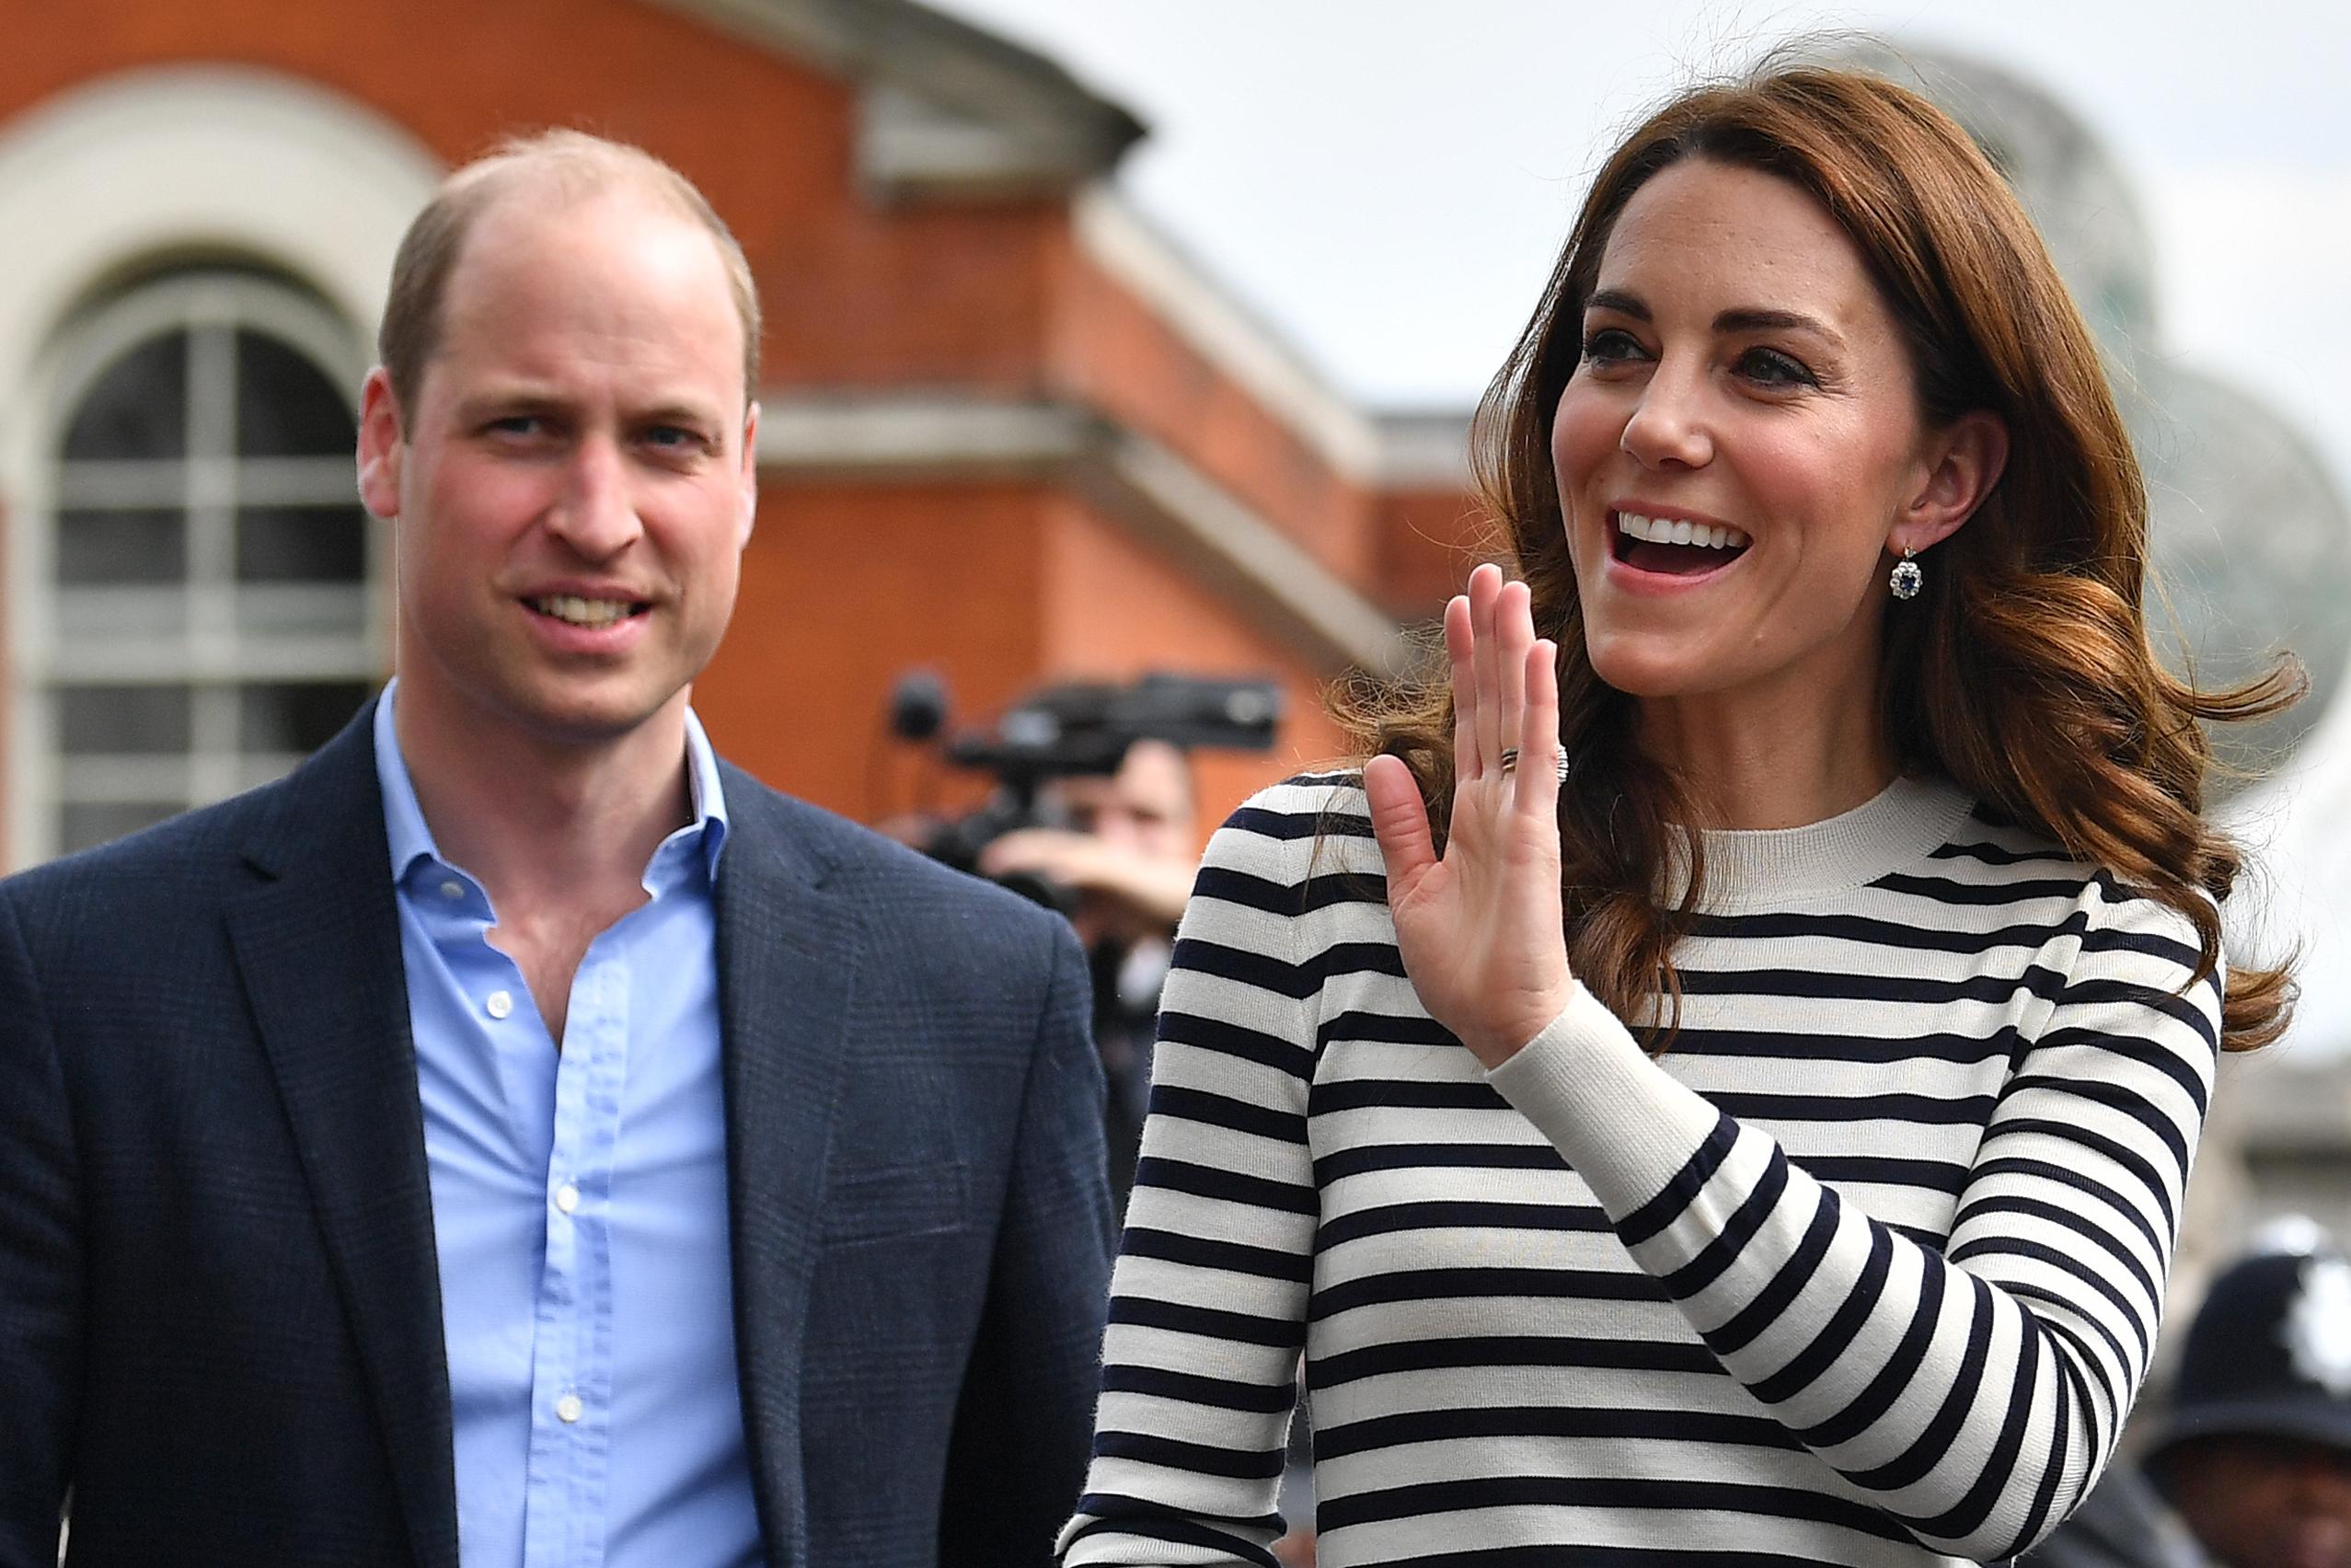 Kate Middleton and Prince William Share an Awkward Gesture On TV